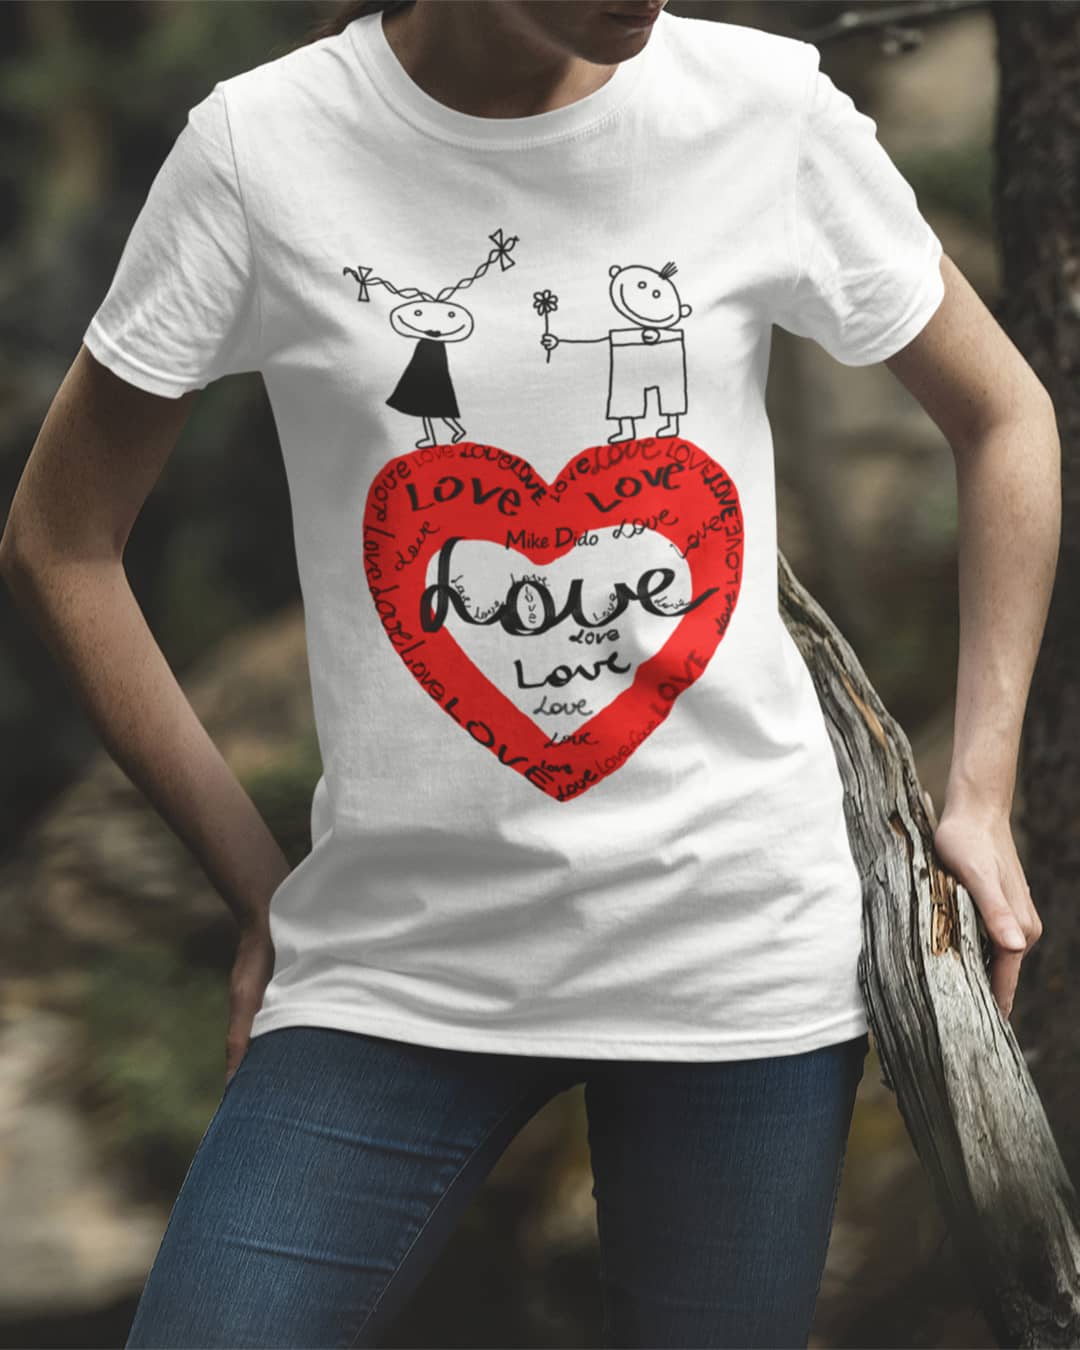 White And Red Graphic Tee Love Heart He She by Mike Dido